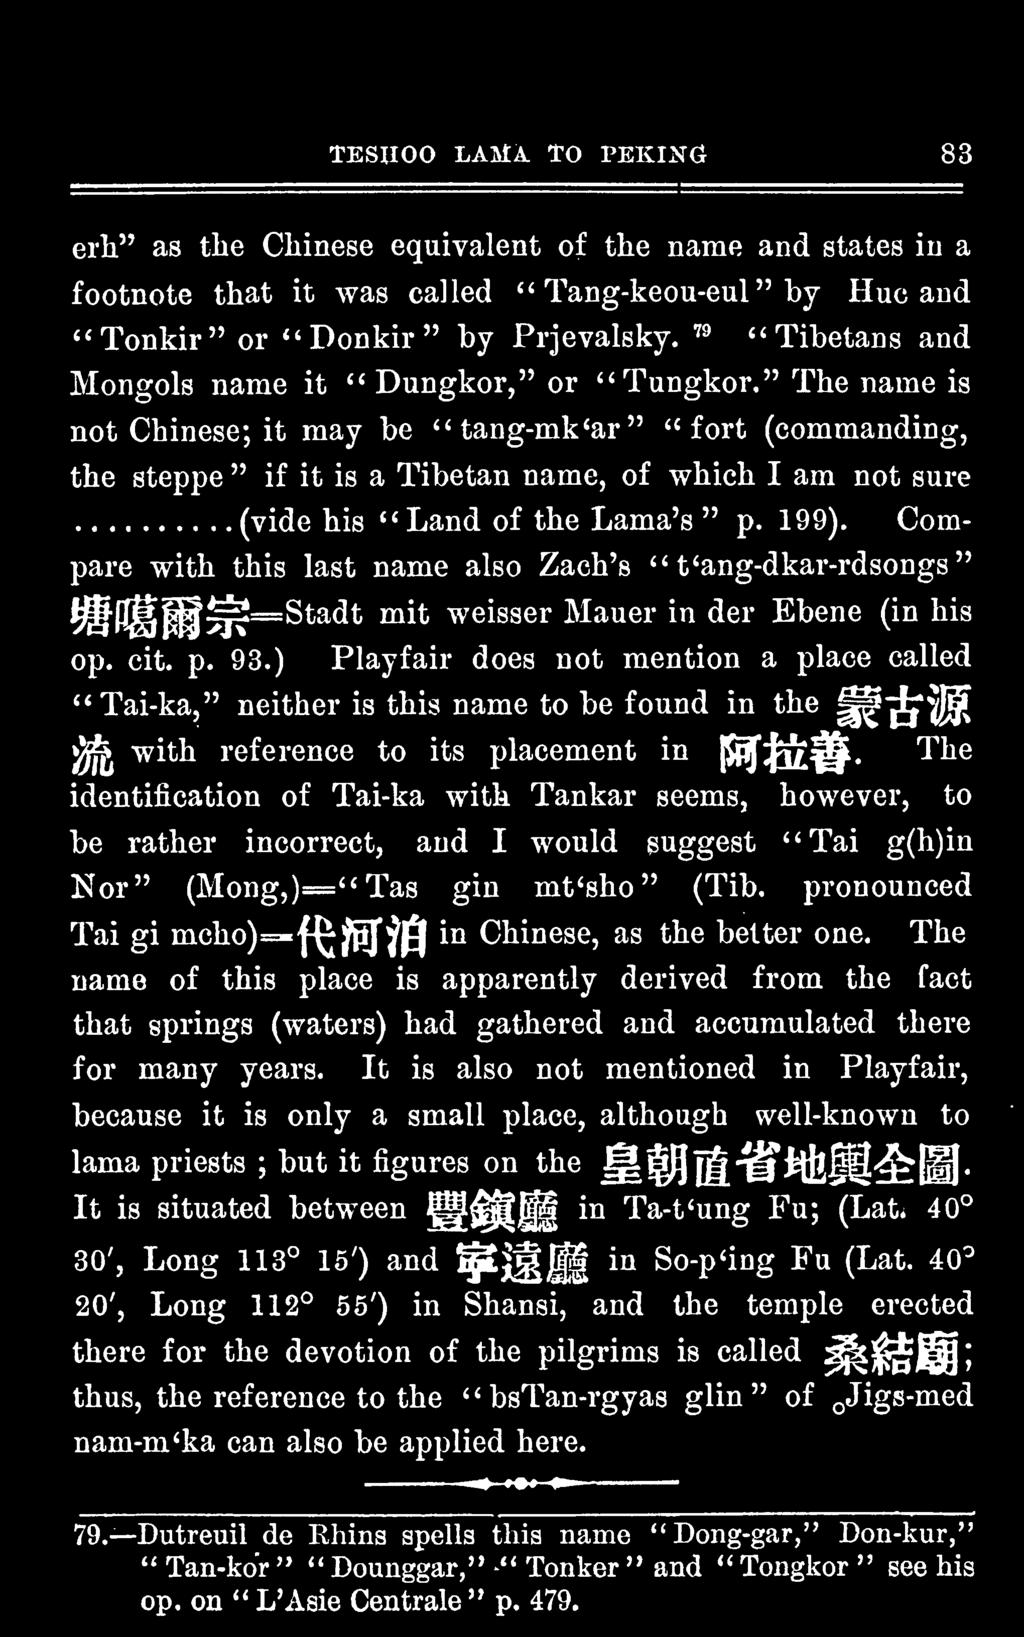 ) Playfair does not mention a place called " Tai-ka," neither is this name to be found in the ^~j^^ ]j& with reference to its placement in The [JPJ^ll^.